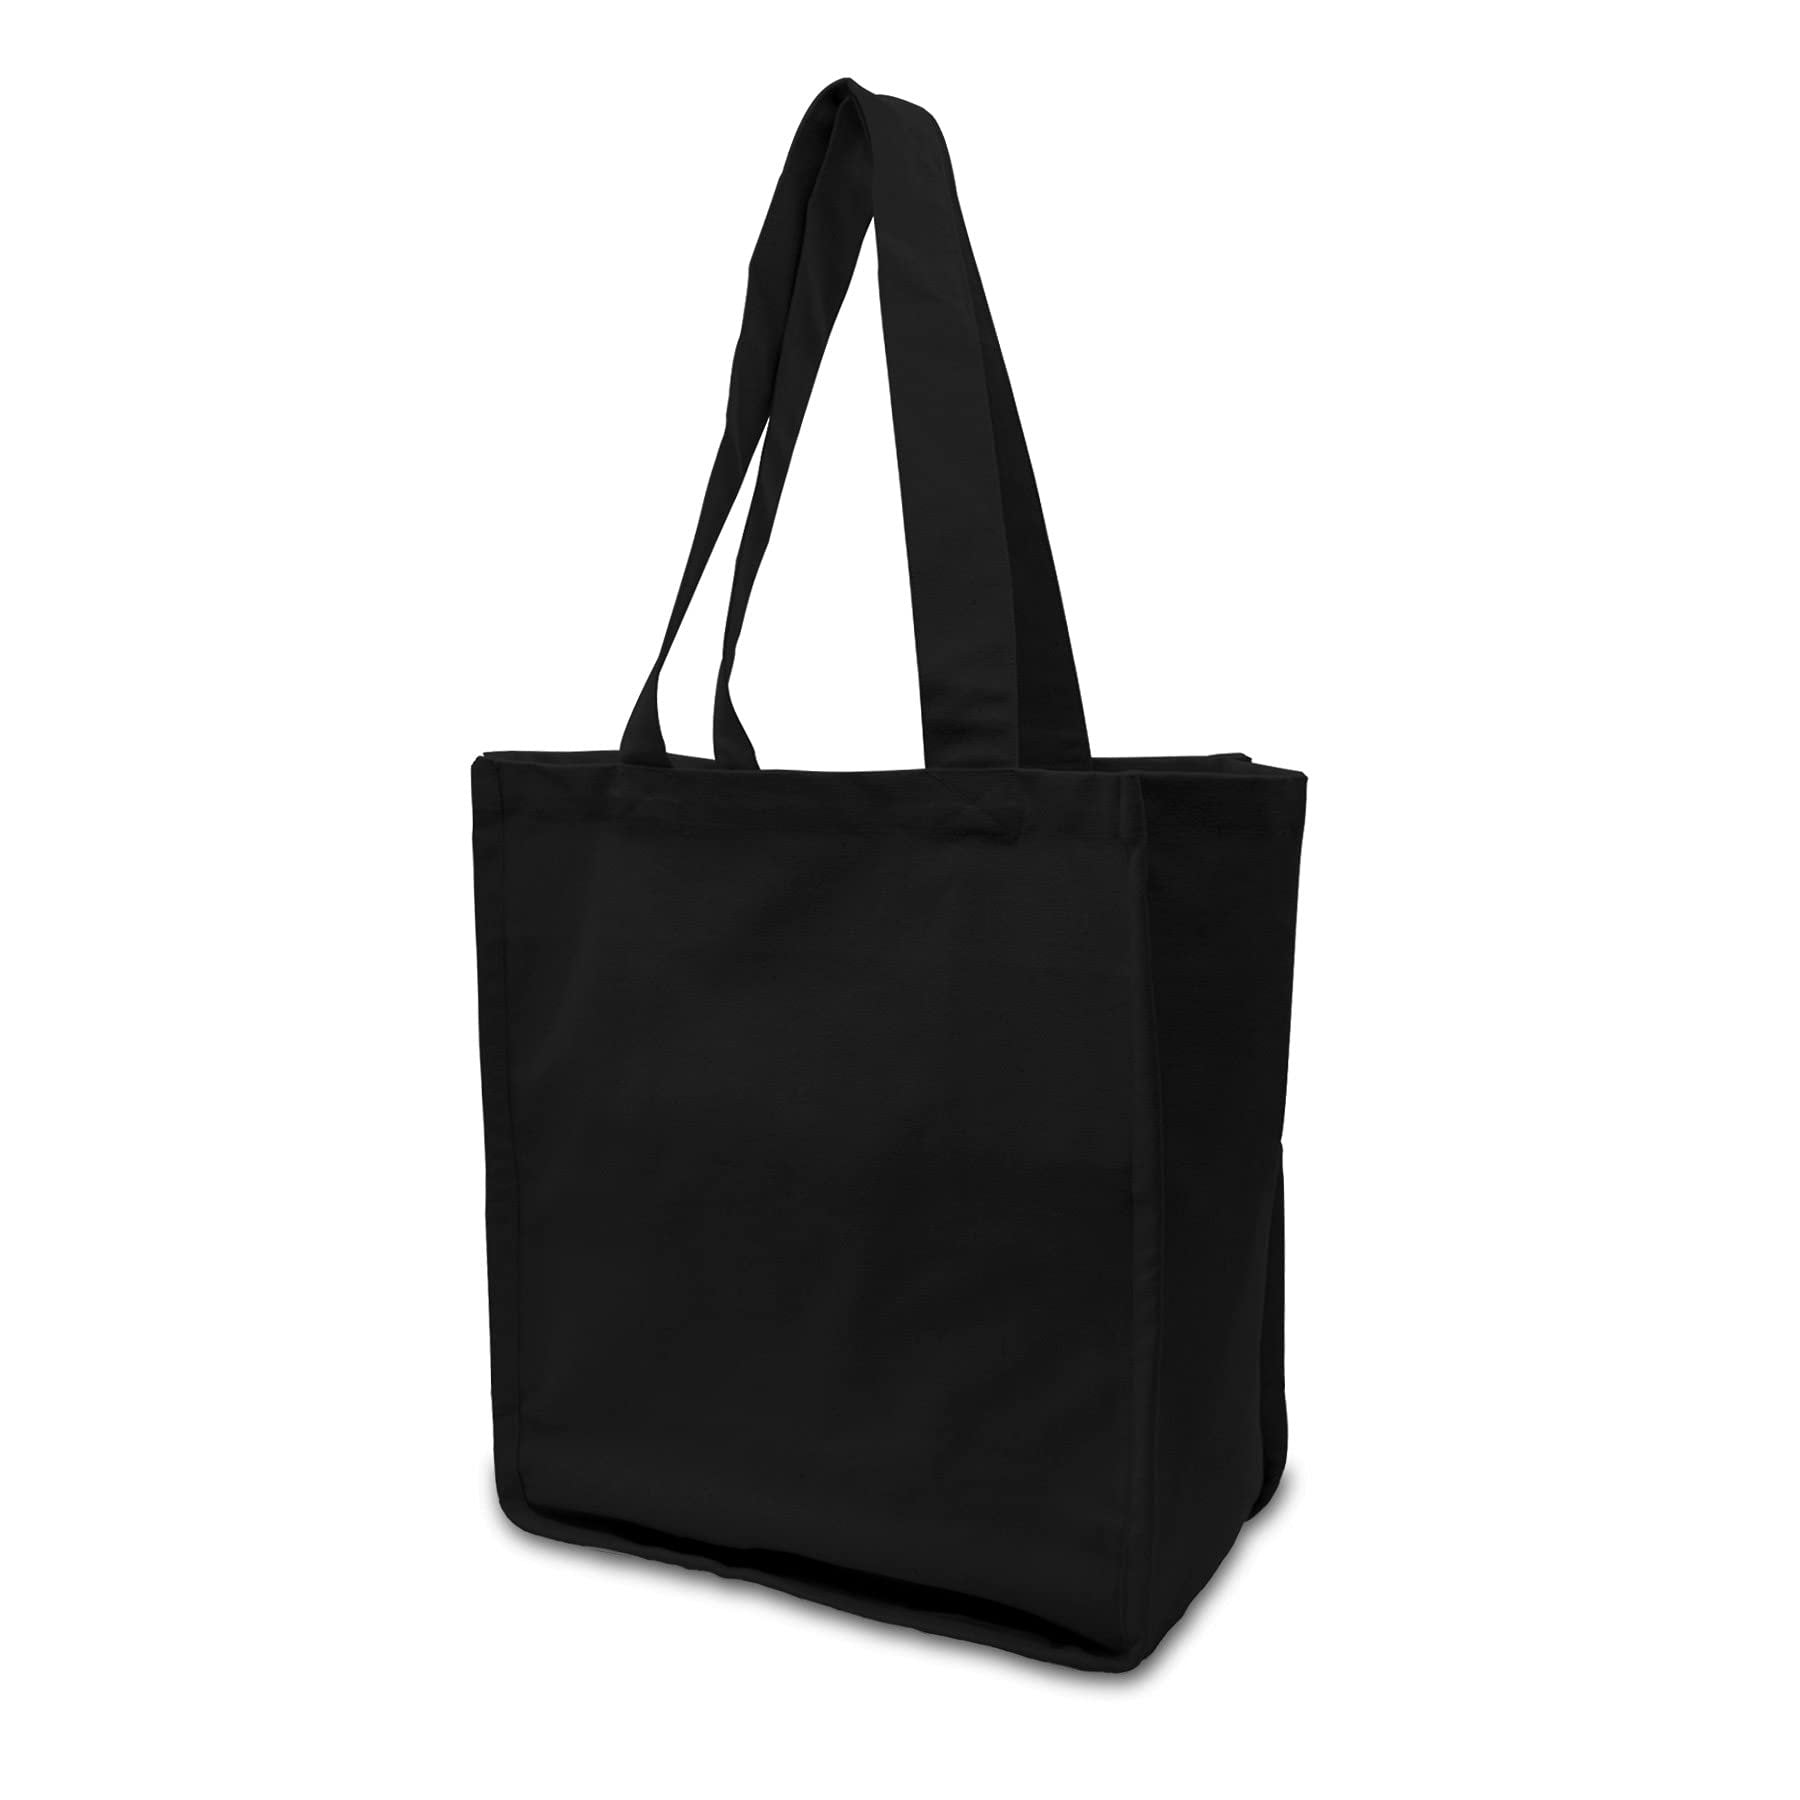 Black Tote Bag - 3 Pack Large Organic Cotton Shopping Tote with Handles & Pockets, Reusable Eco-Friendly Blank Cloth Bags for Groceries, Shopping, Sublimation, Gift Giving, Travel, Bulk - 13.5x16.5x8